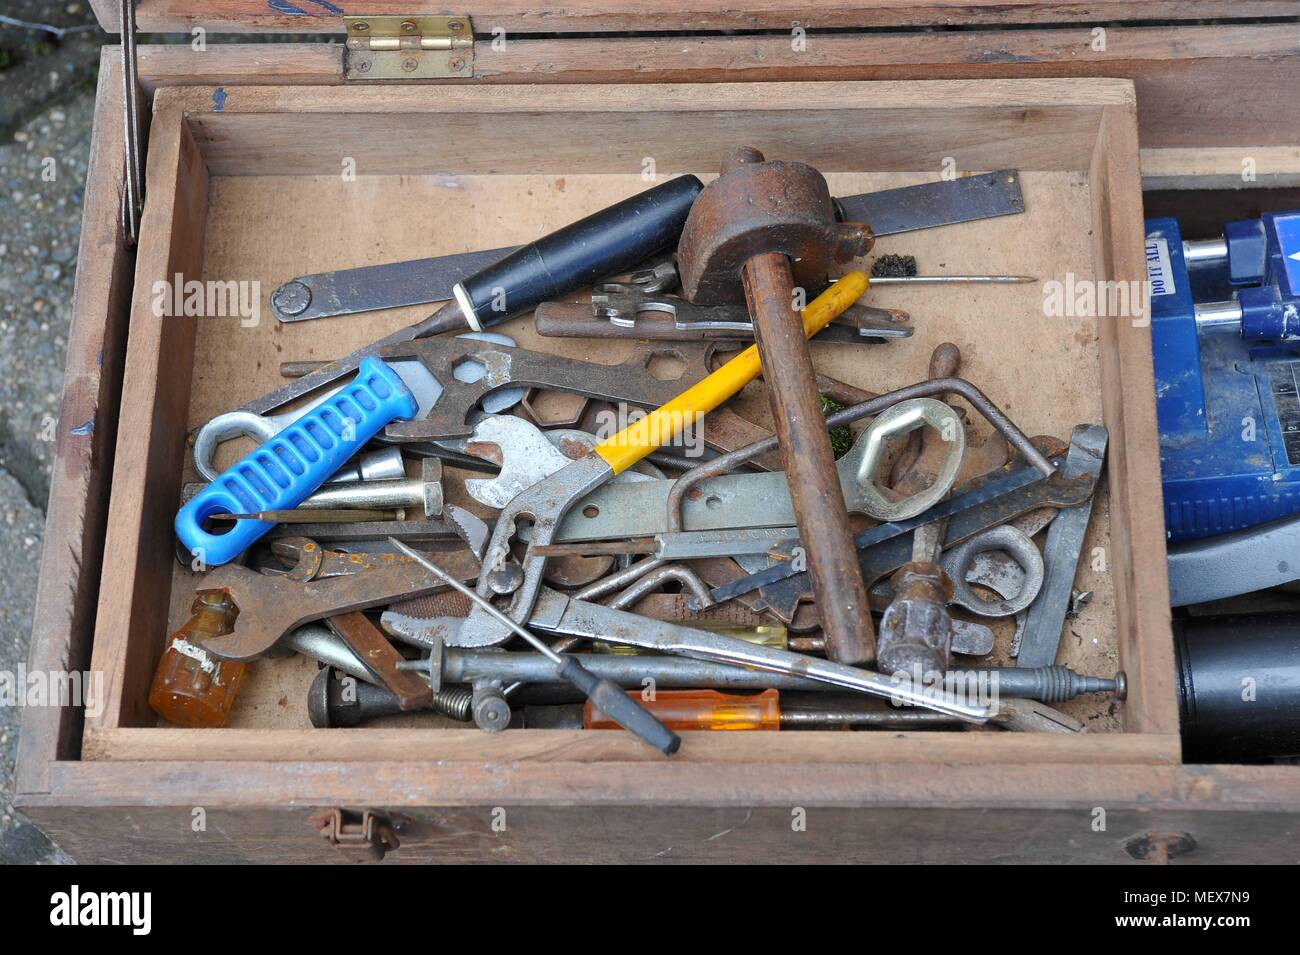 Tools in a box Stock Photo